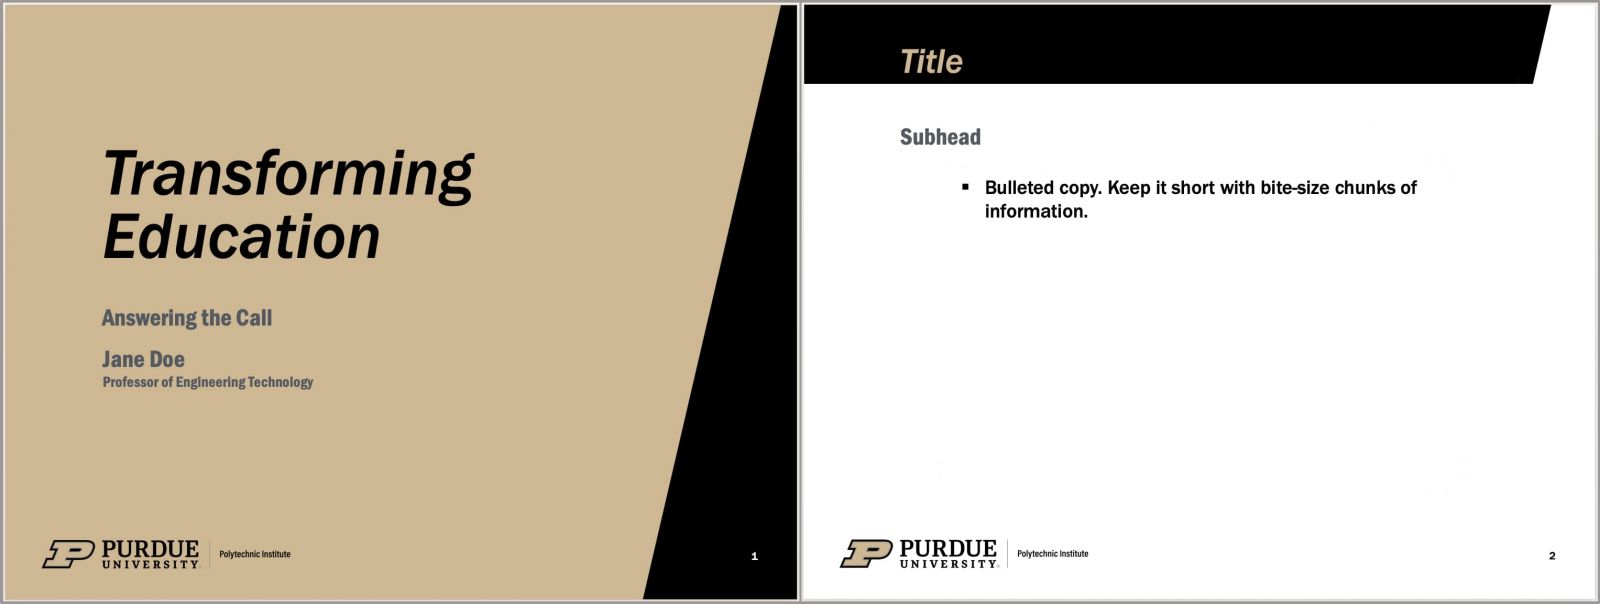 PowerPoint gold template samples